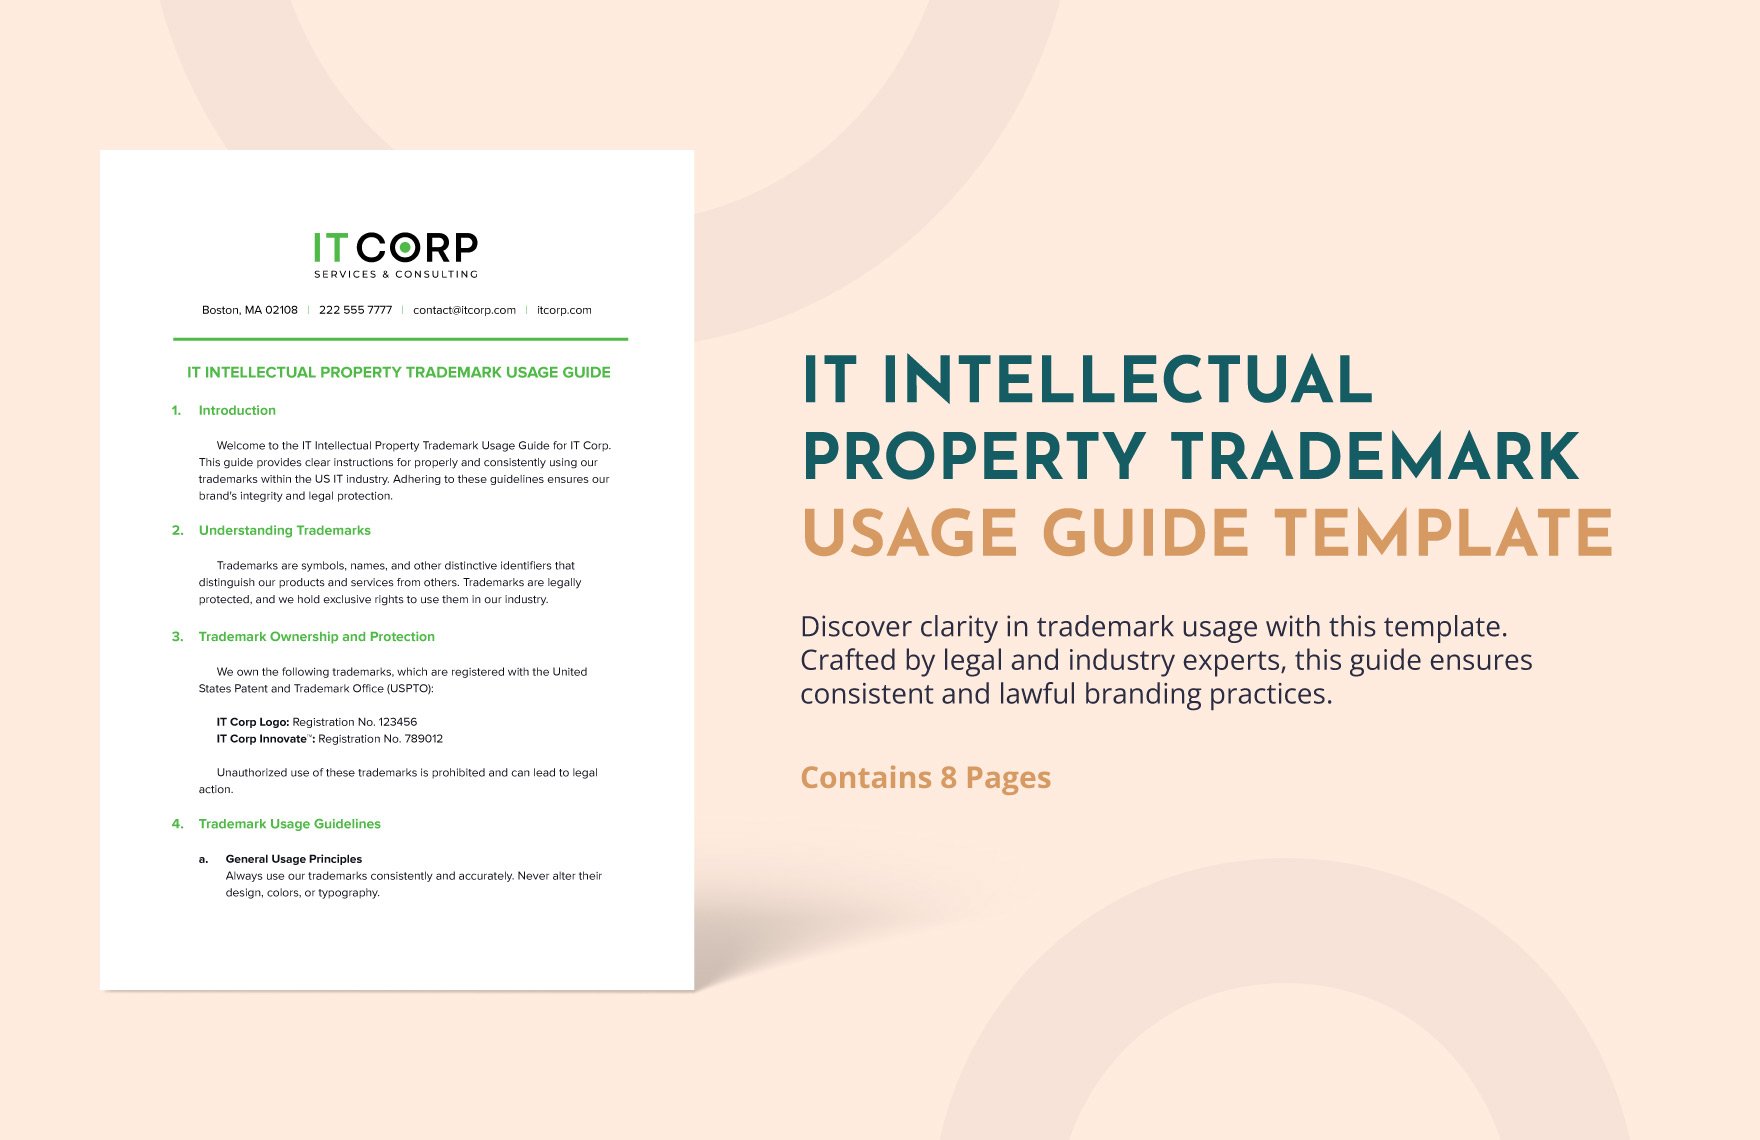 IT Intellectual Property Trademark Usage Guide Template